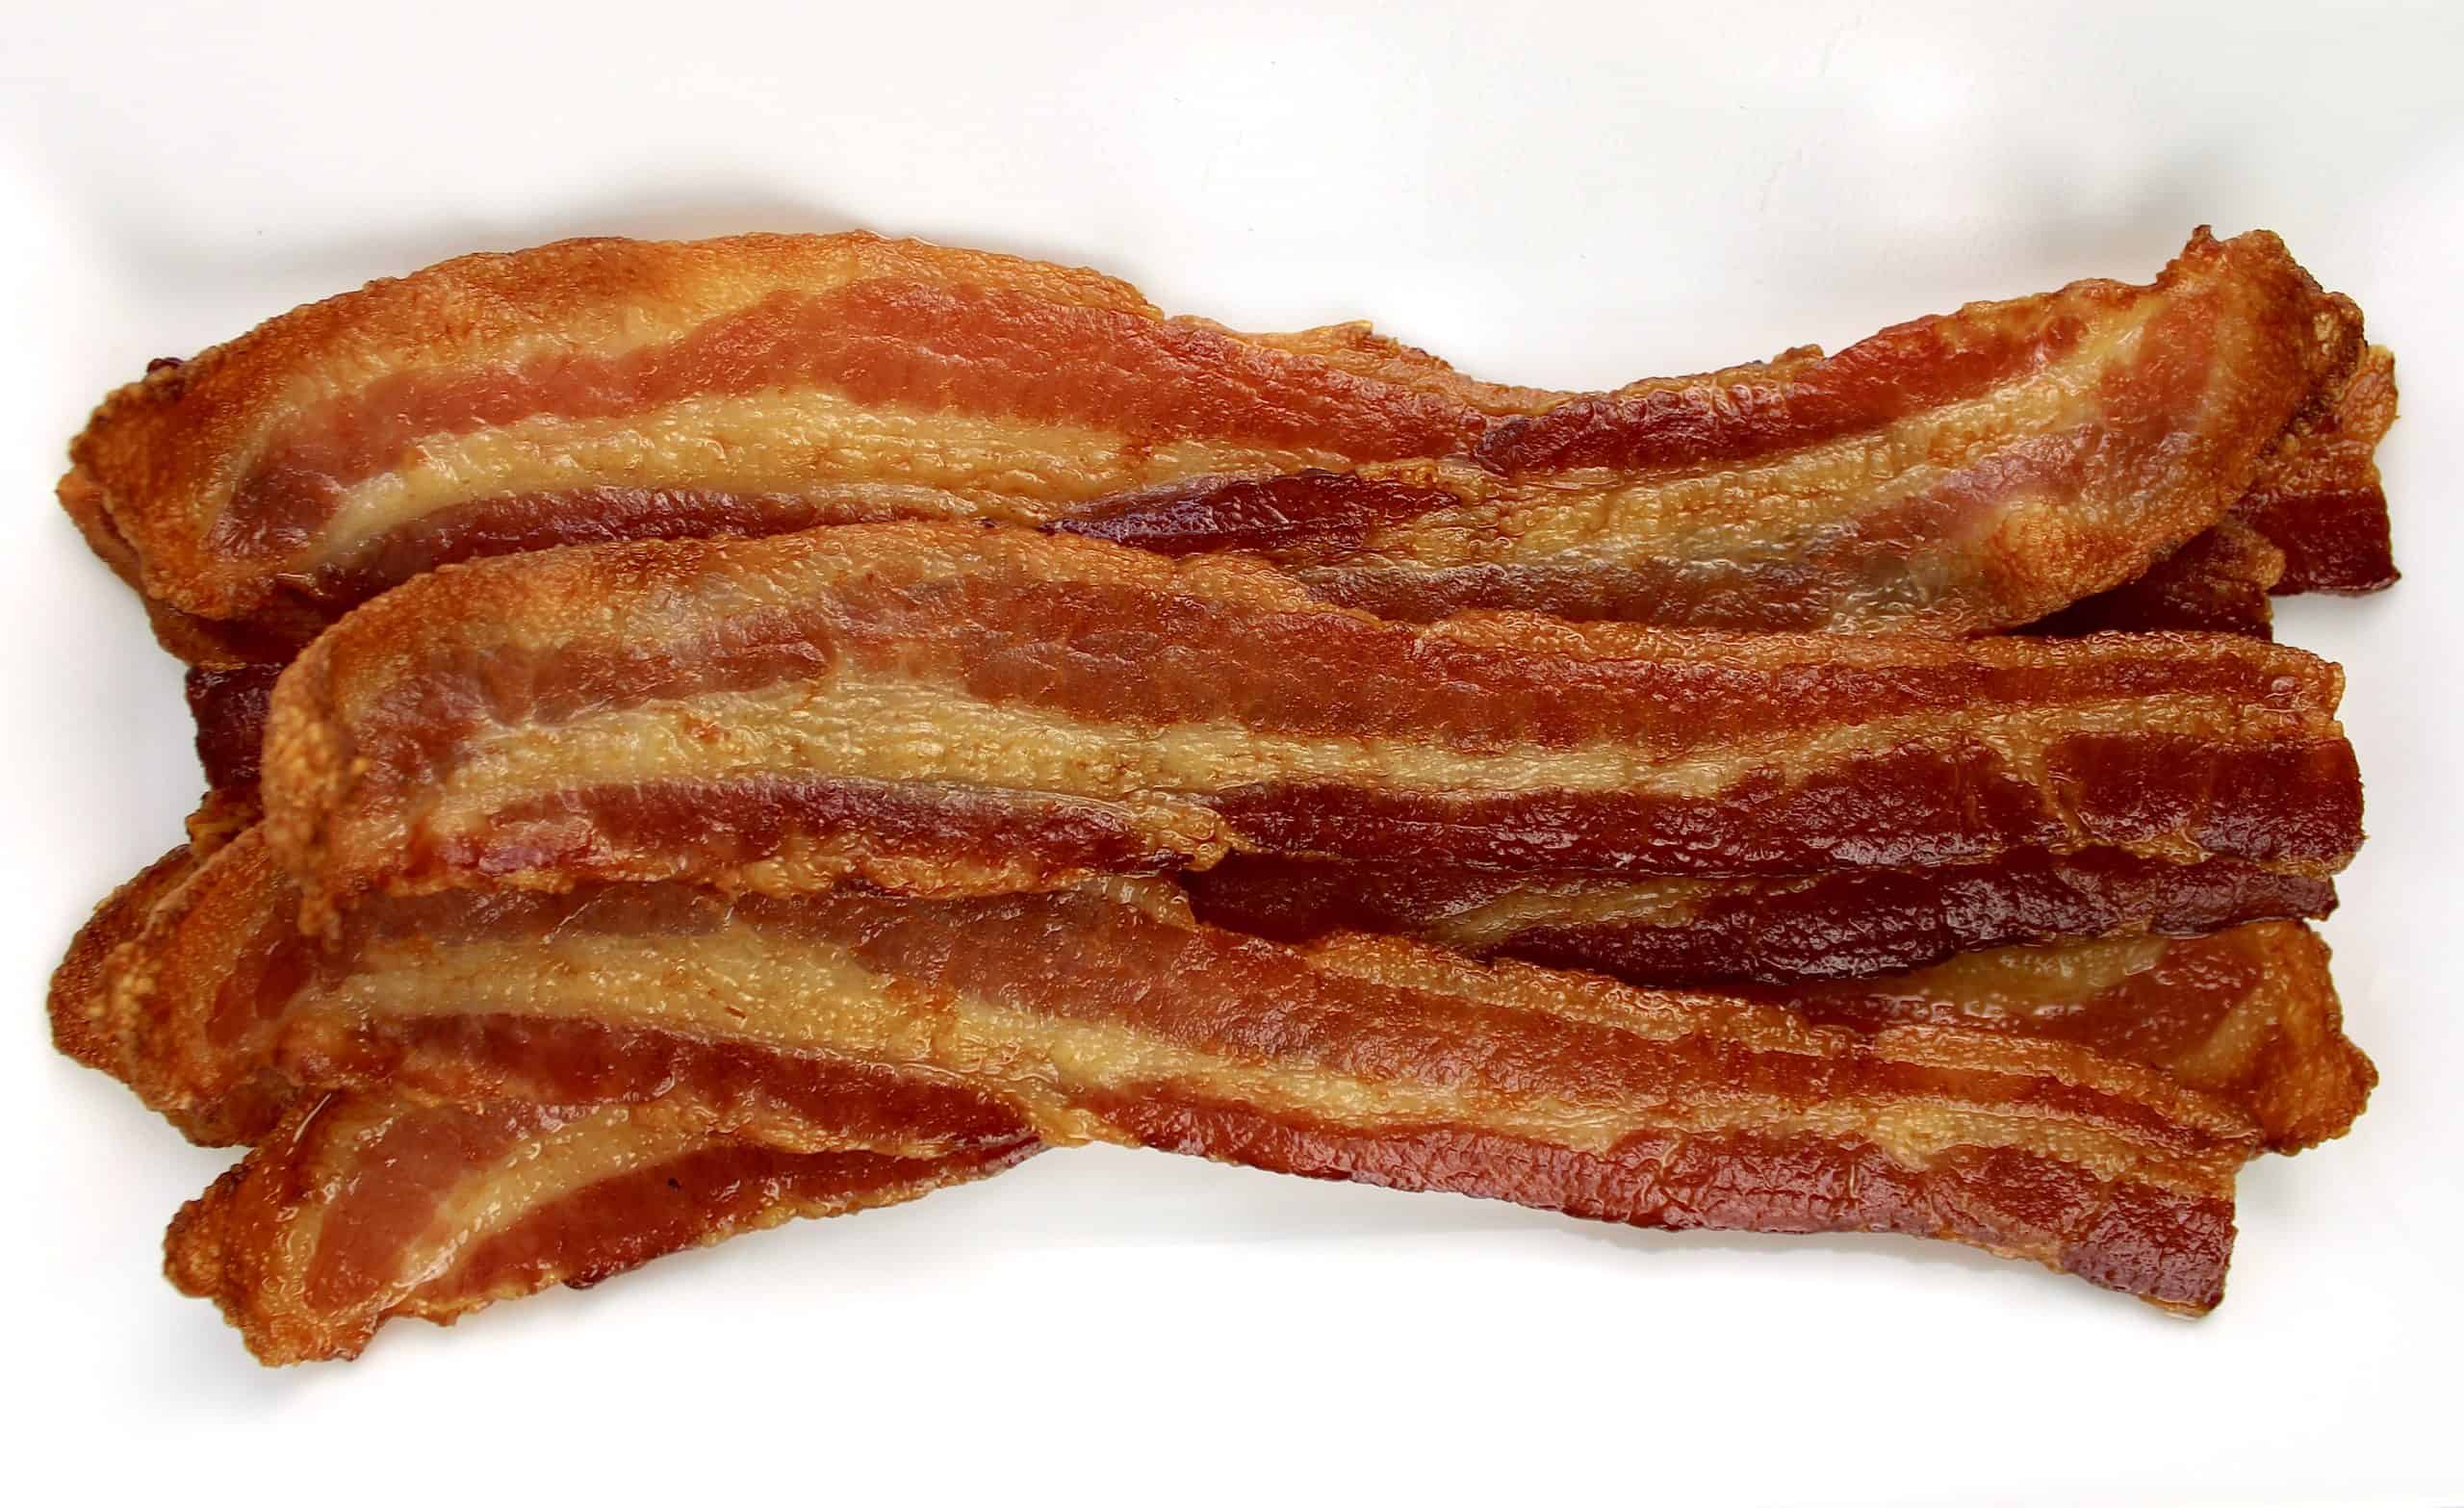 slices of cooked bacon on white plate